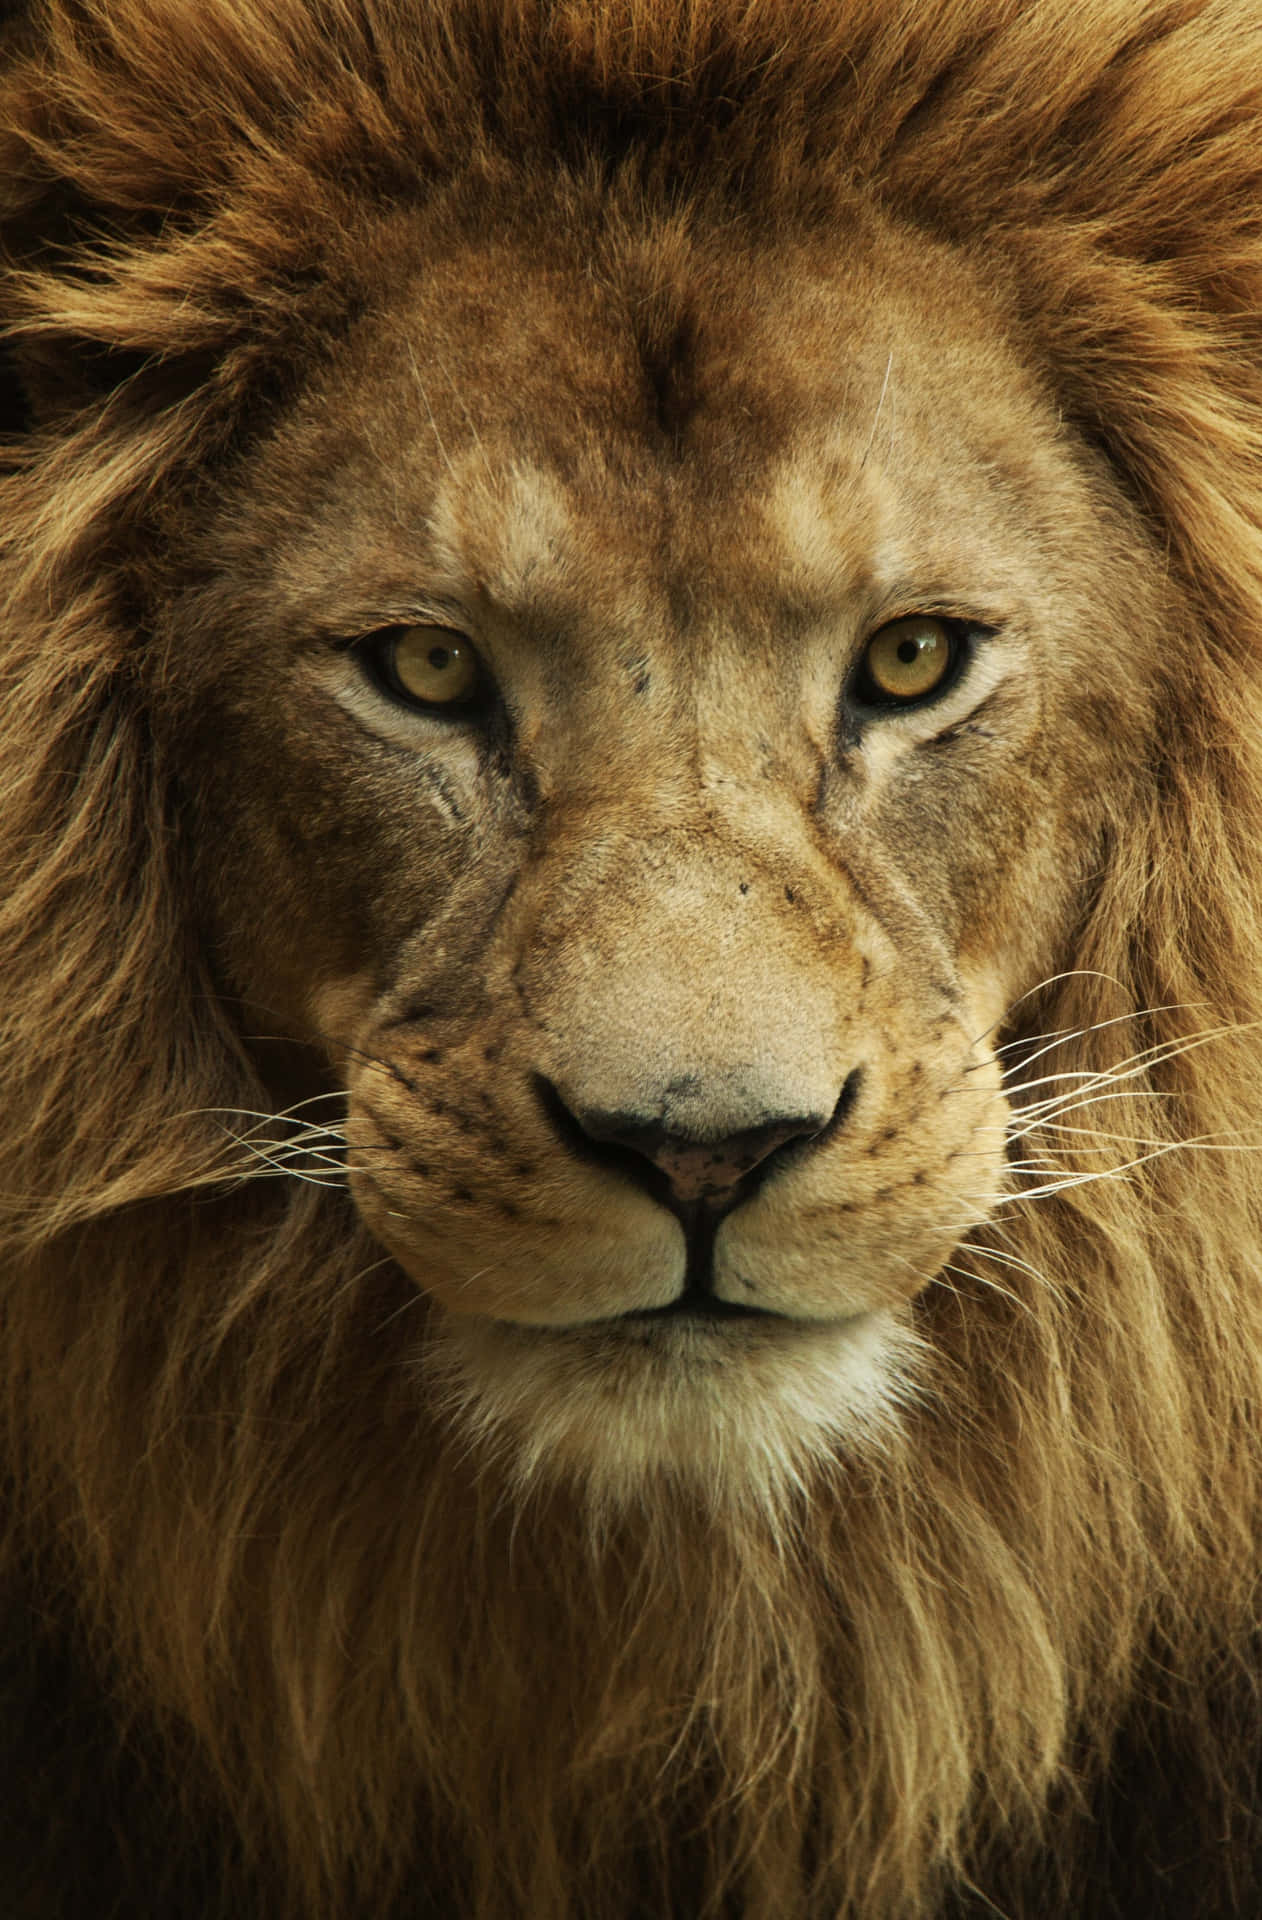 The Majesty of a Lion's Face